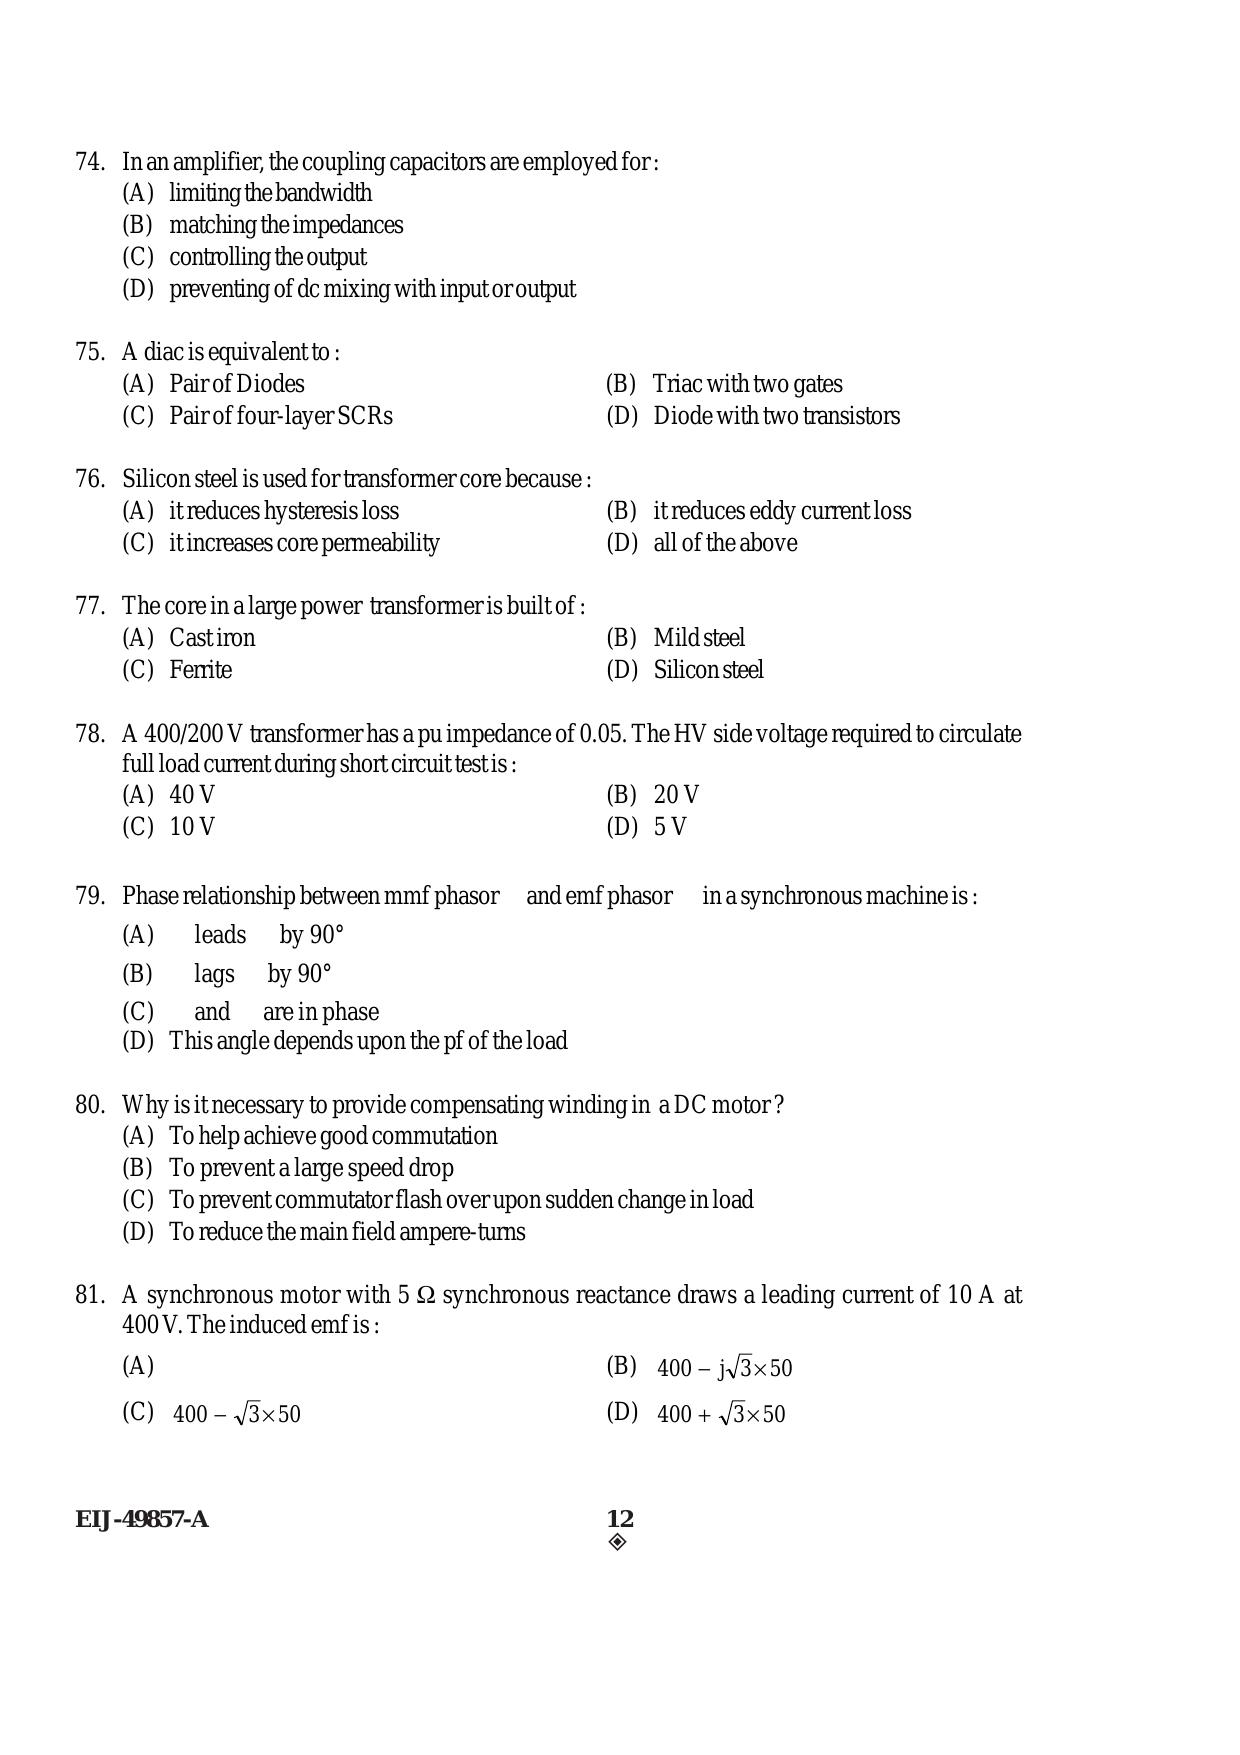 SEBI Officer Electrical Engineering Previous Paper - Page 12